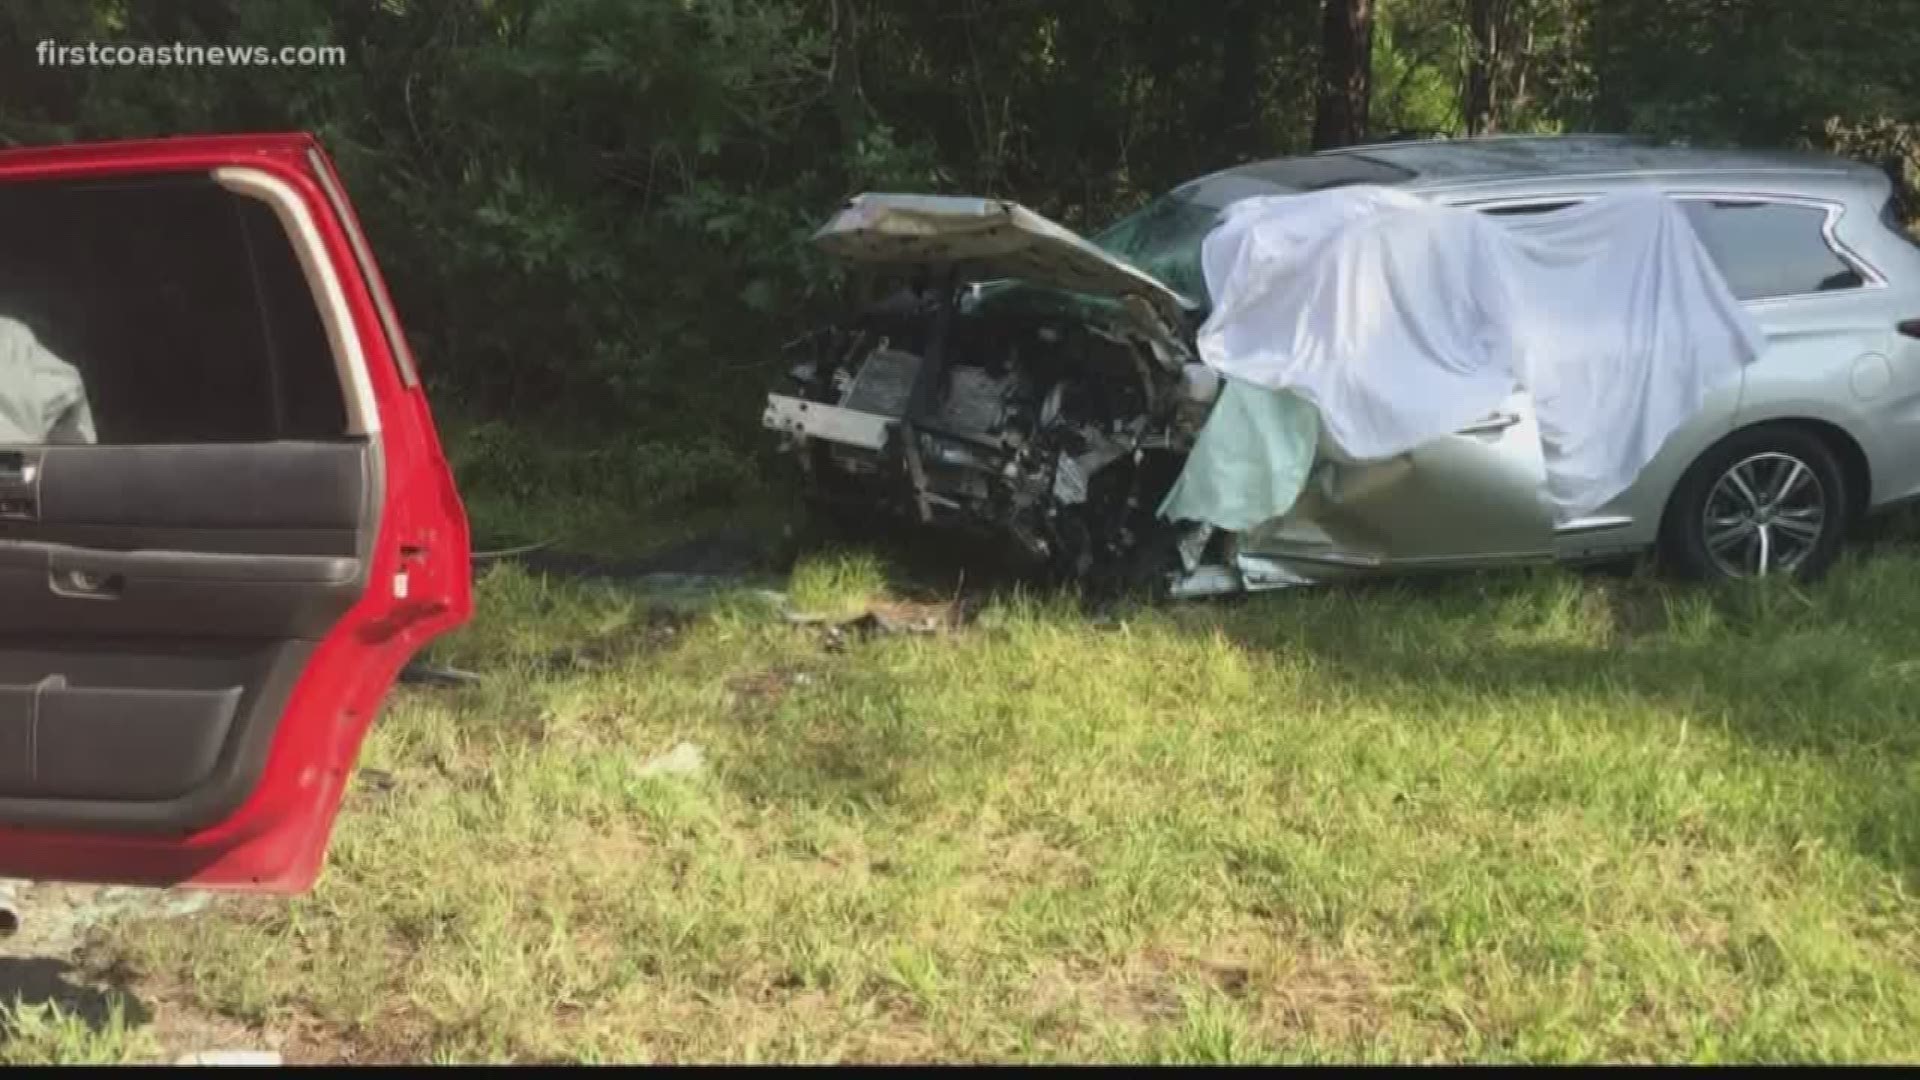 Authorities have released the names of the four victims killed after a horrific crash involving an SUV and car in St. Johns County.